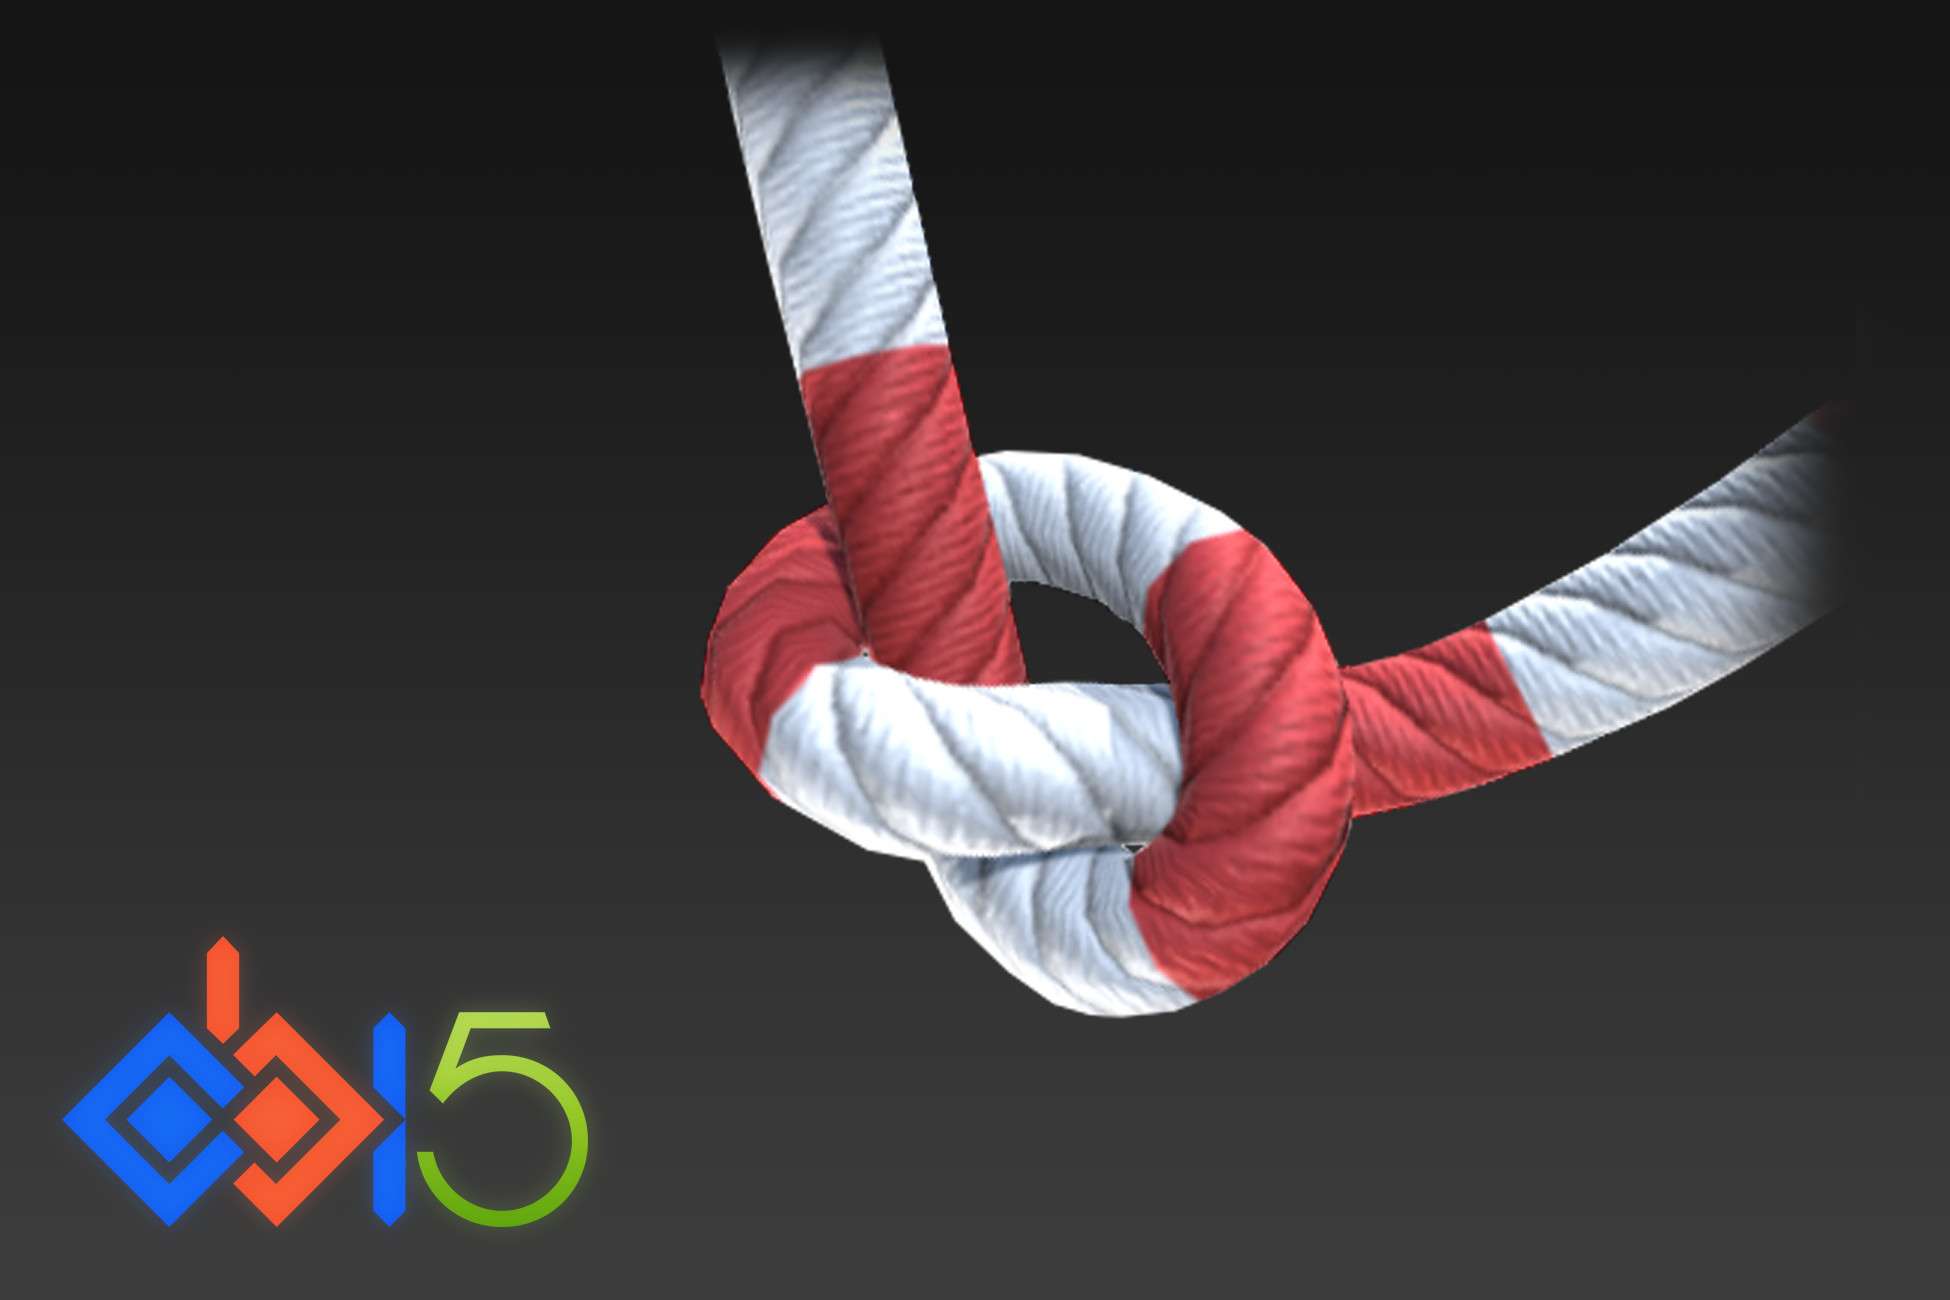 Creating a rope physics - Unity Forum